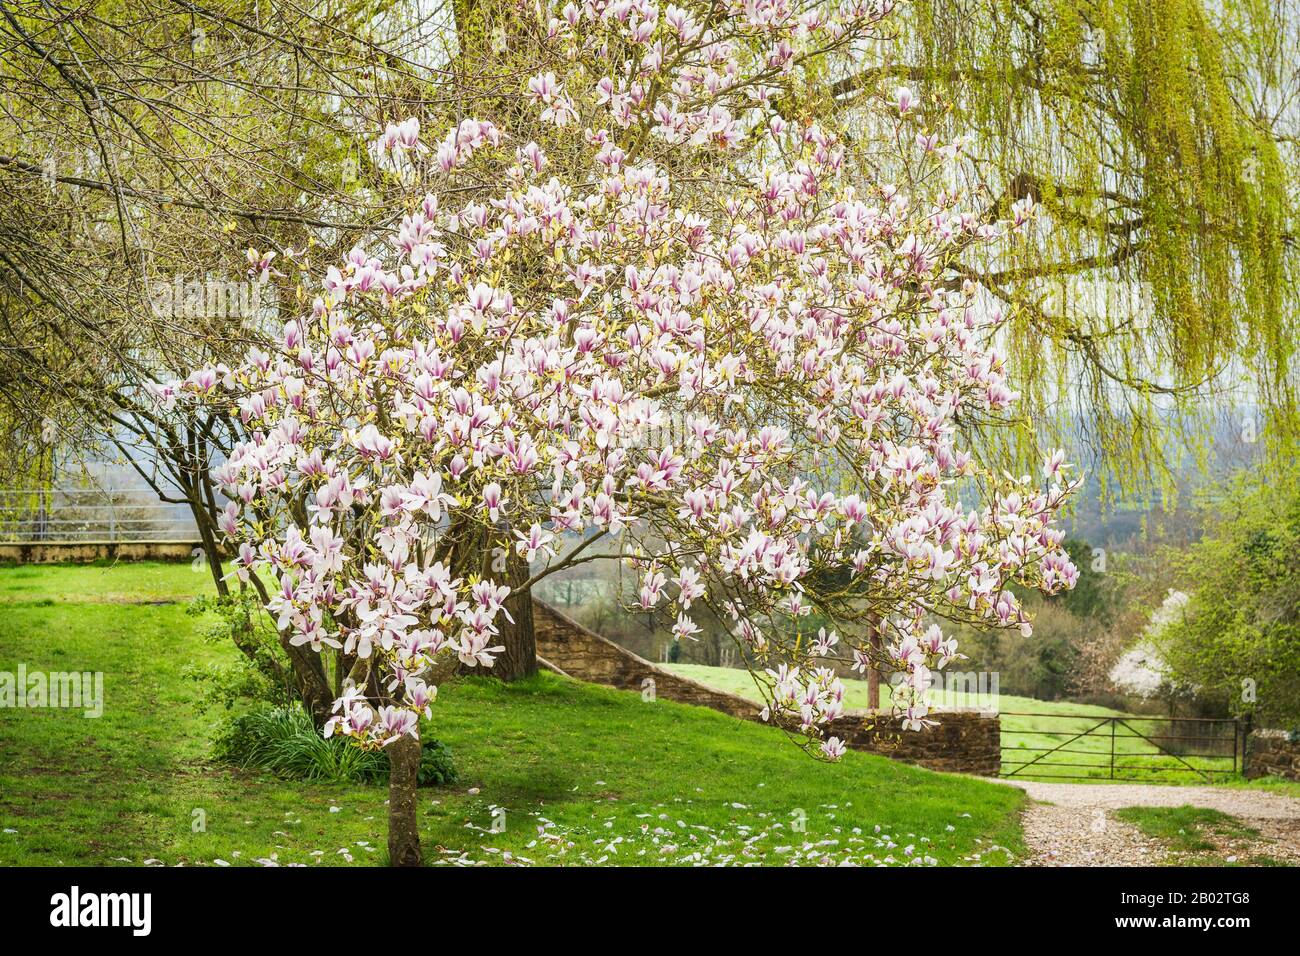 A fine Magnolia tree in full flower showing how conflict with a Prunus avium on the left has inhibited flowering growth on that side of the tree. The Stock Photo